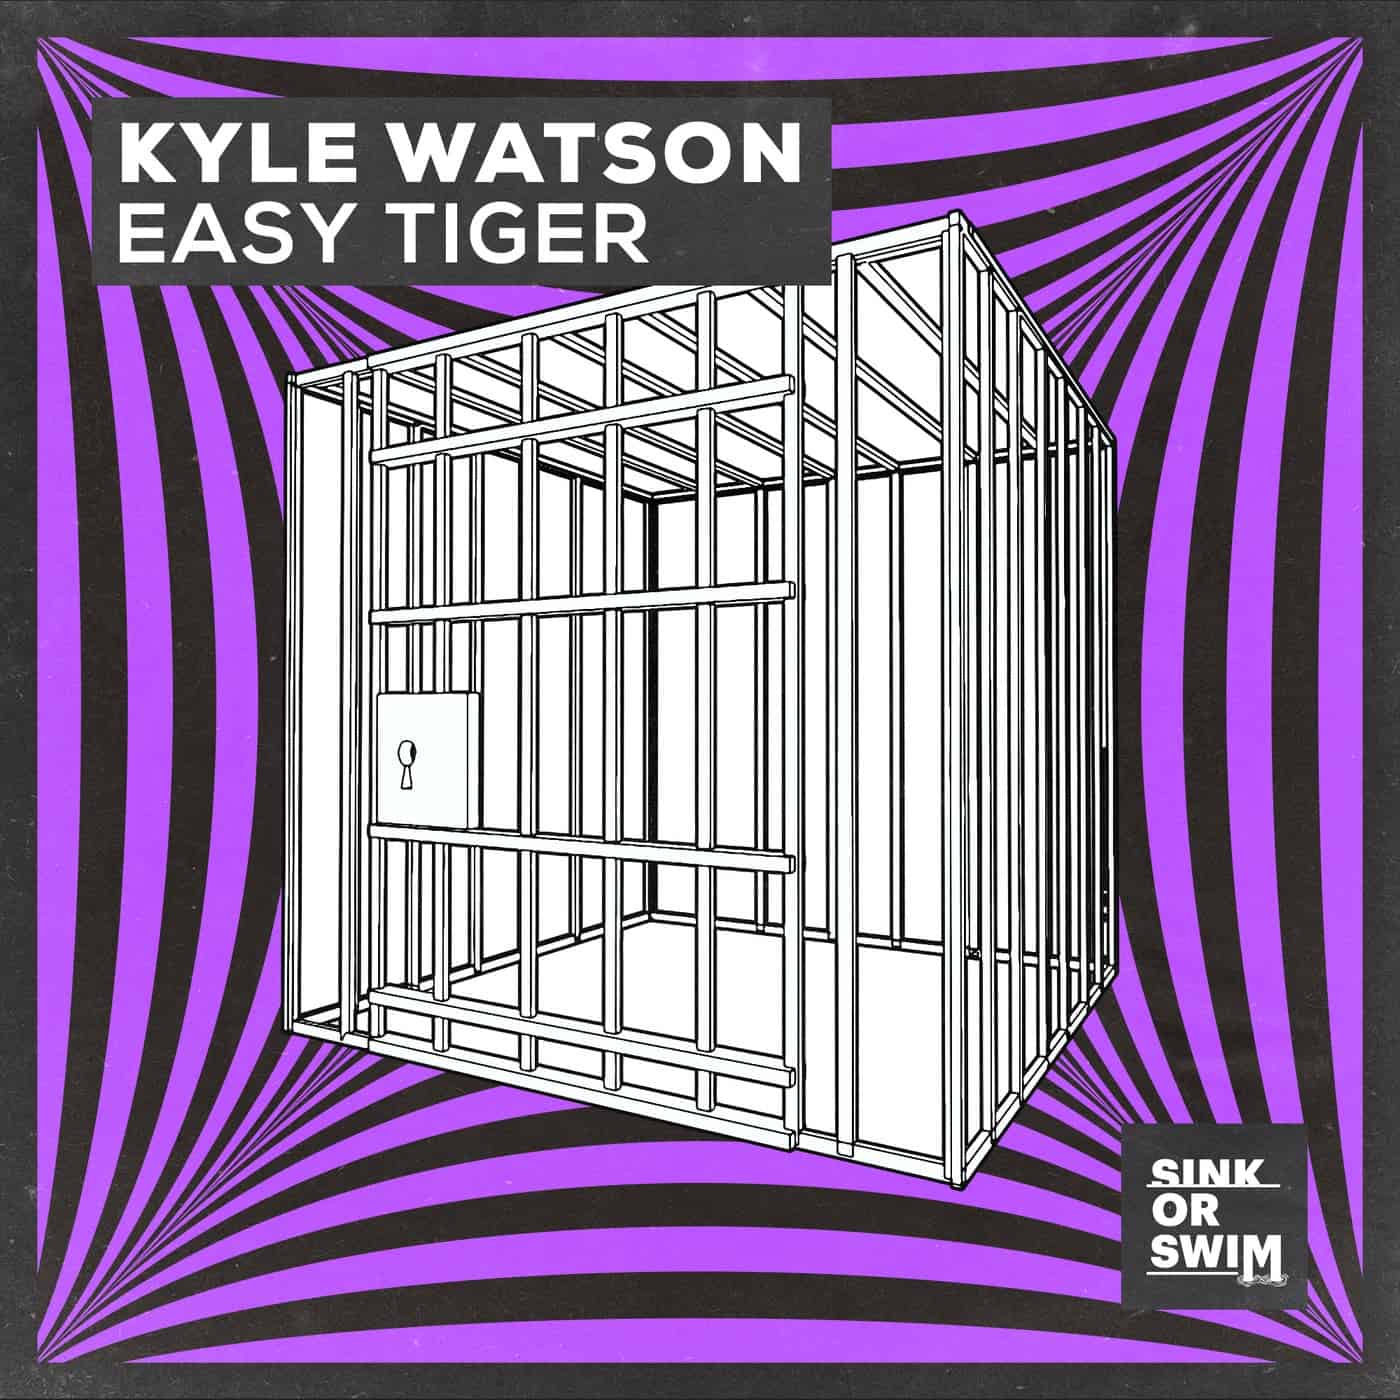 image cover: Easy Tiger (Extended Mix) by Kyle Watson on Sink or Swim